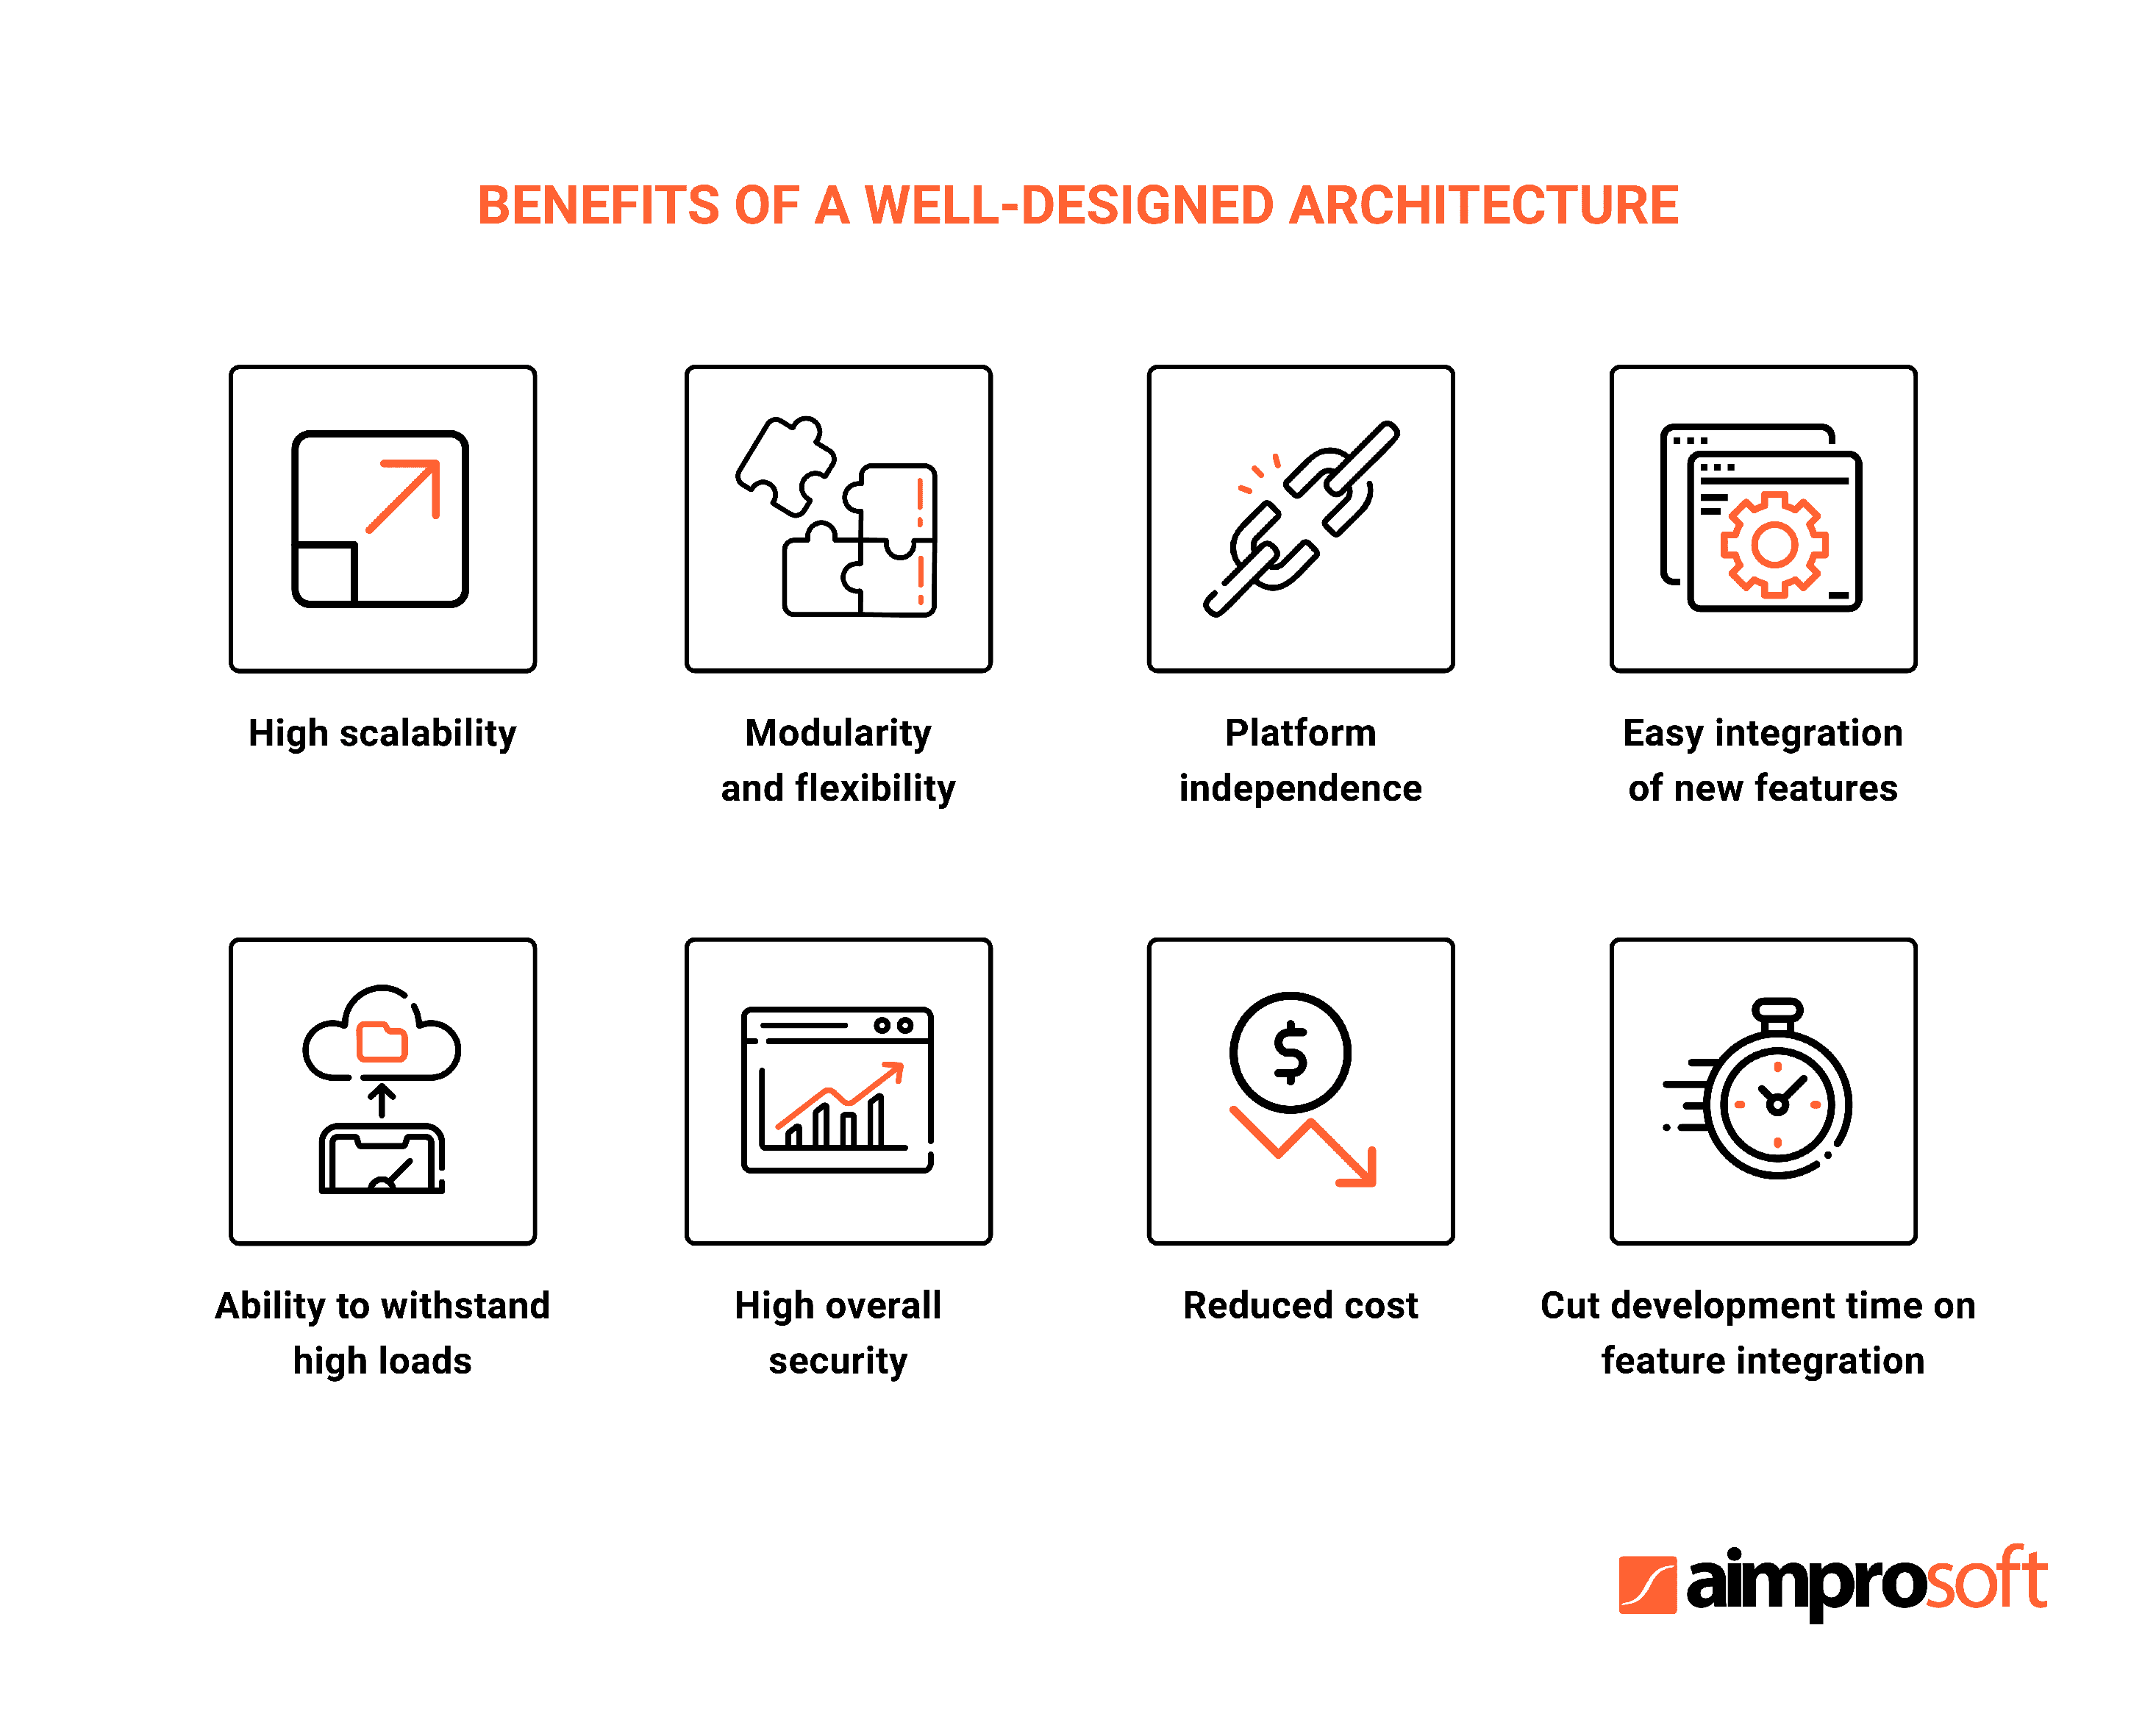 Benefits of an Internet of Things app architecture